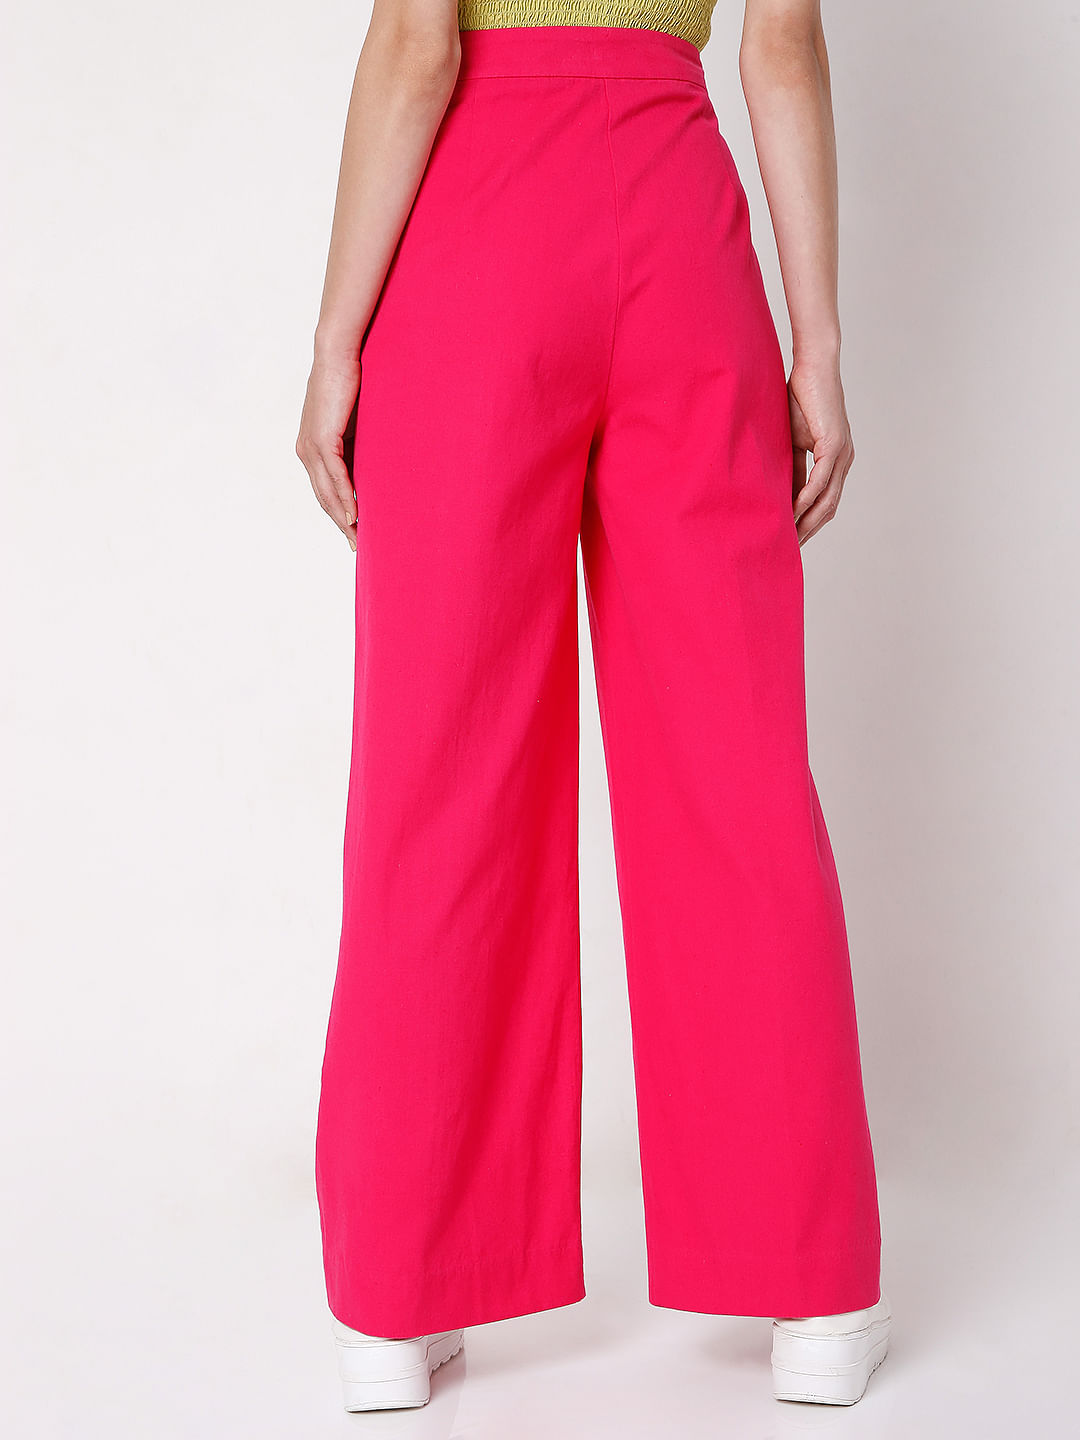 Buy Womens High Waisted Wide Leg Pants Button up Flowing Palazzo Pants Back  Zip Lightweight Loose Slacks 2019 Casual Work Long Trousers at Amazonin